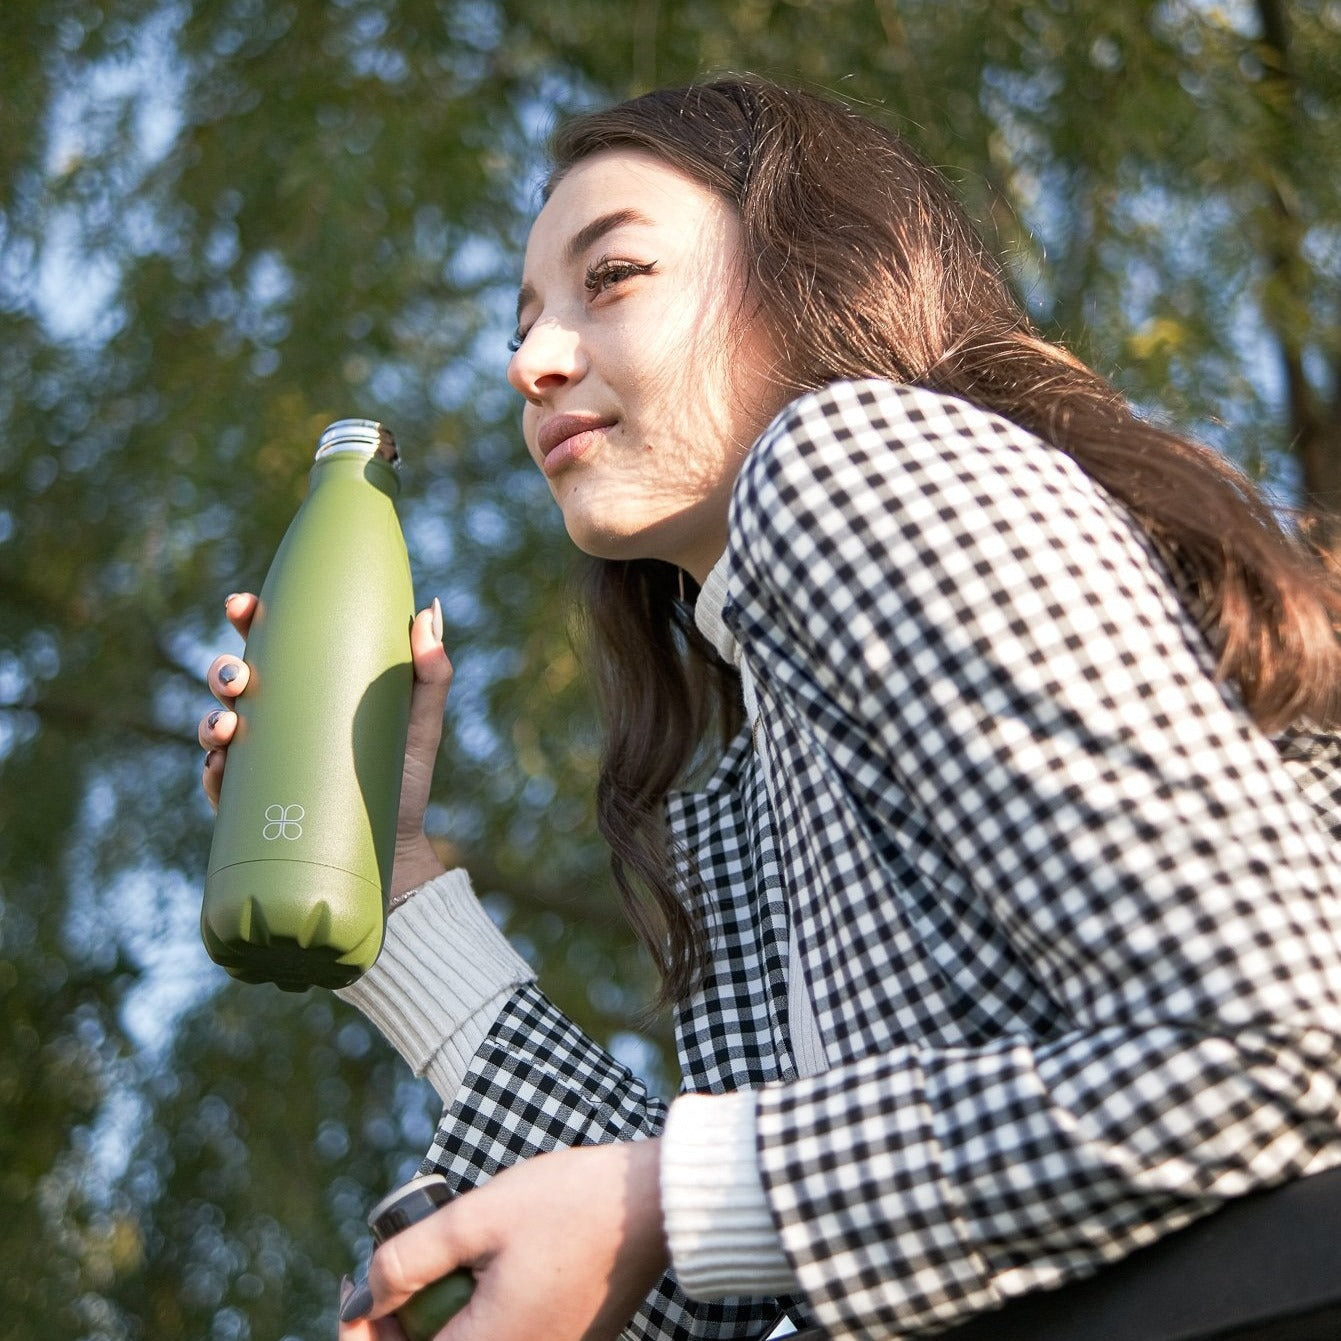 Lady in black and white chequered jacket smiles while she holds a forest green water bottle.